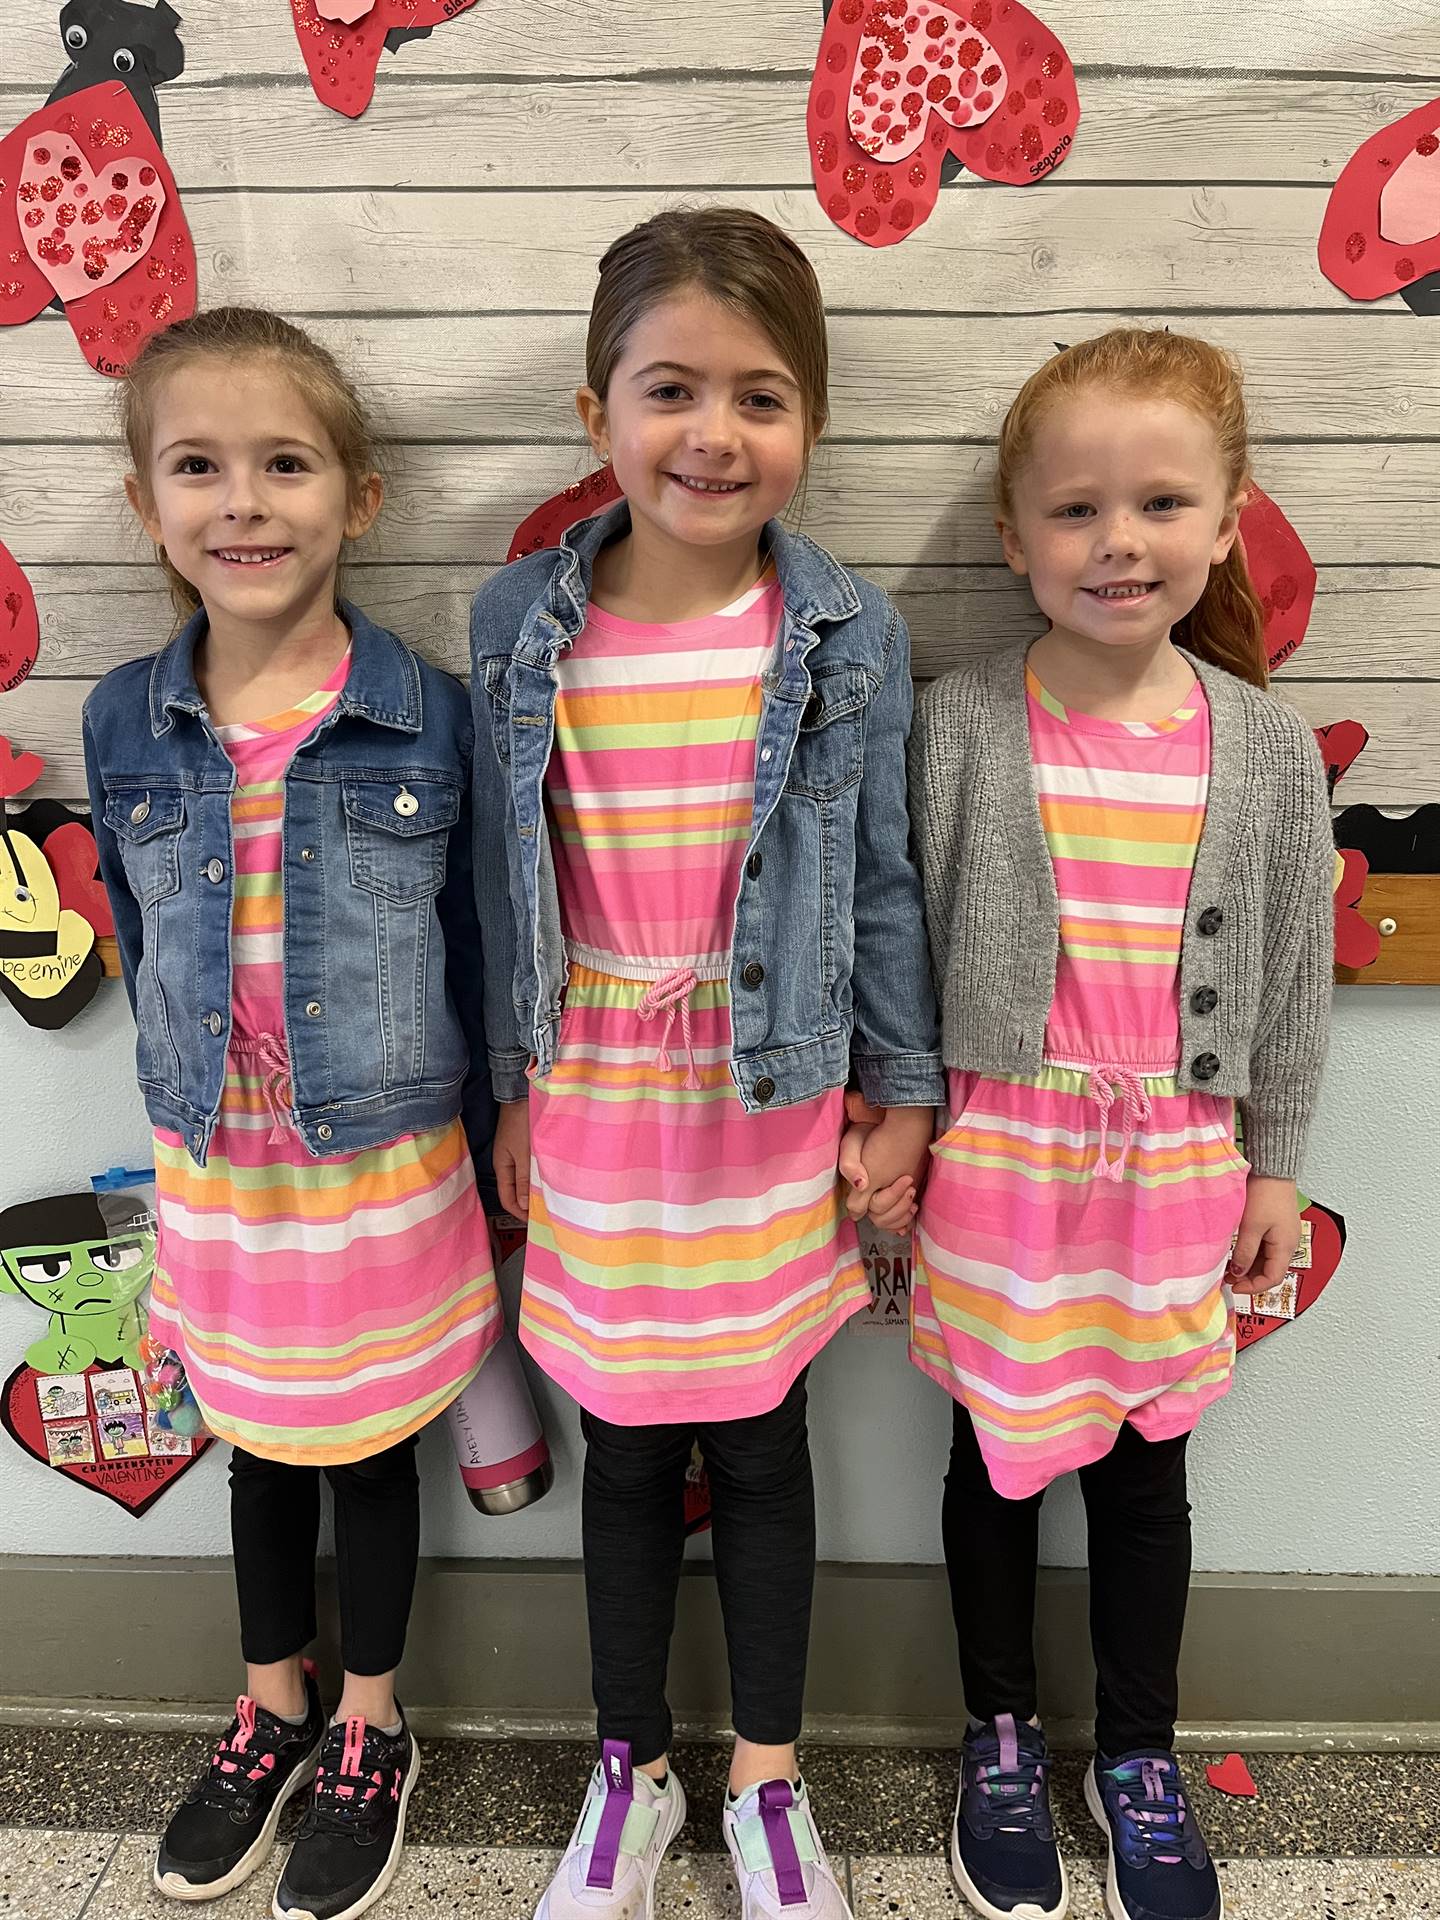 3 students dressed in pink and yellow striped shirts with heart background